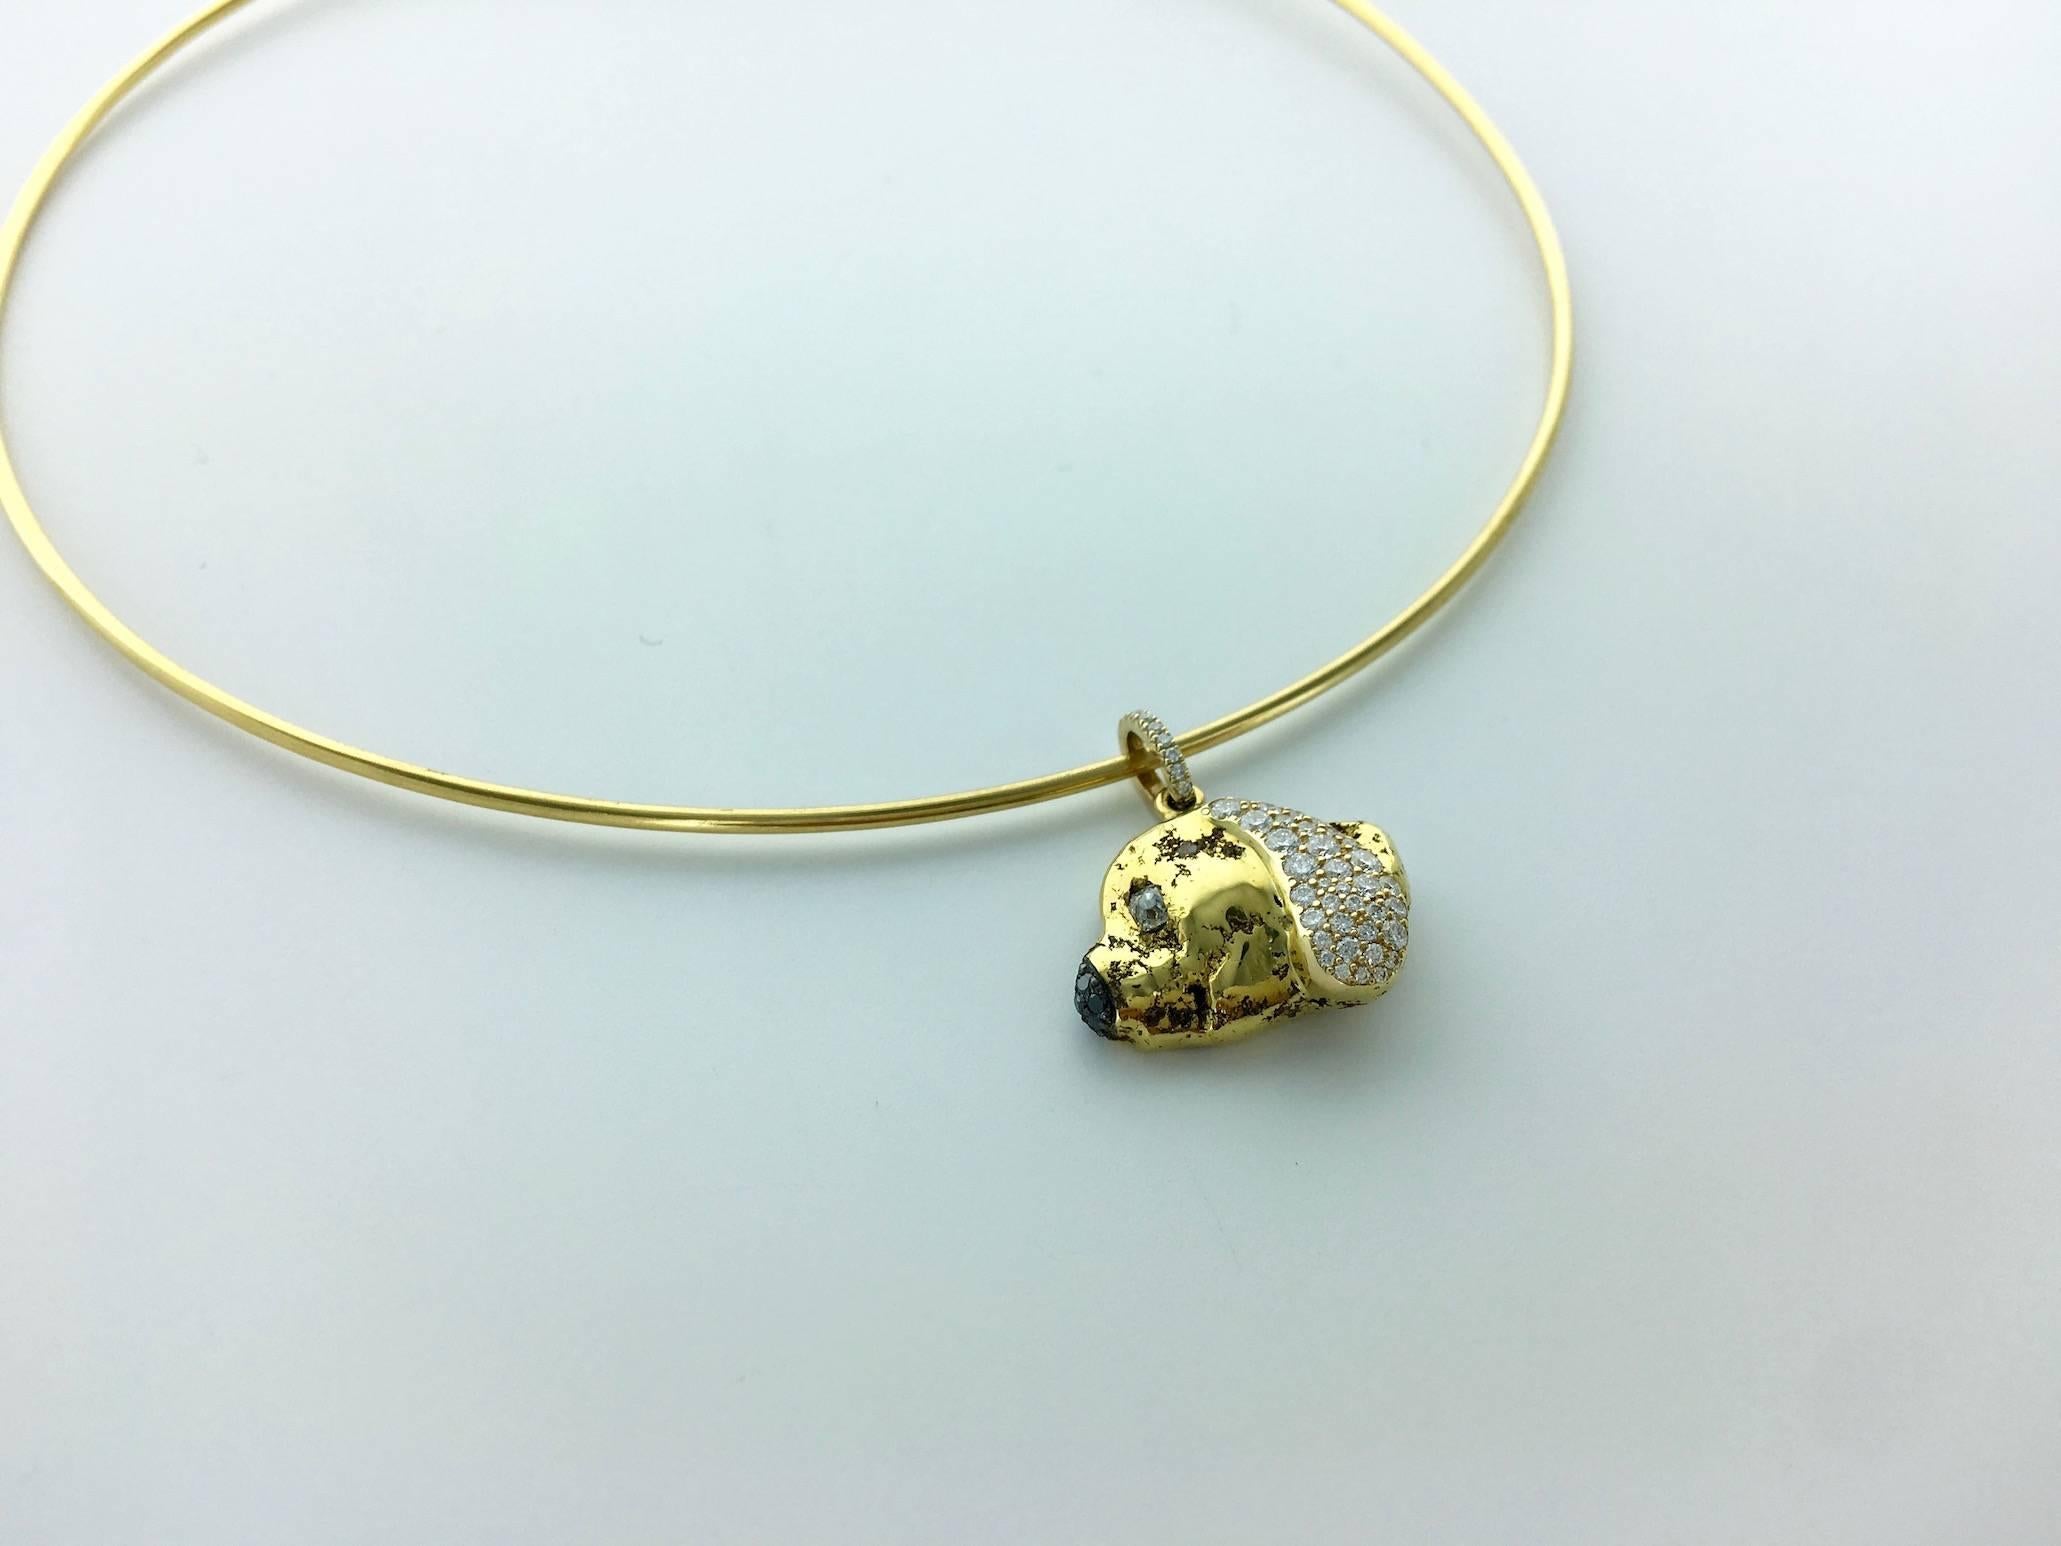 The Necklace is in 18k Yellow Gold and the Lovely Dog's head Pendant is a Gold nugget 22k with white and black Diamond.

Gross weight: 24.50 grams.